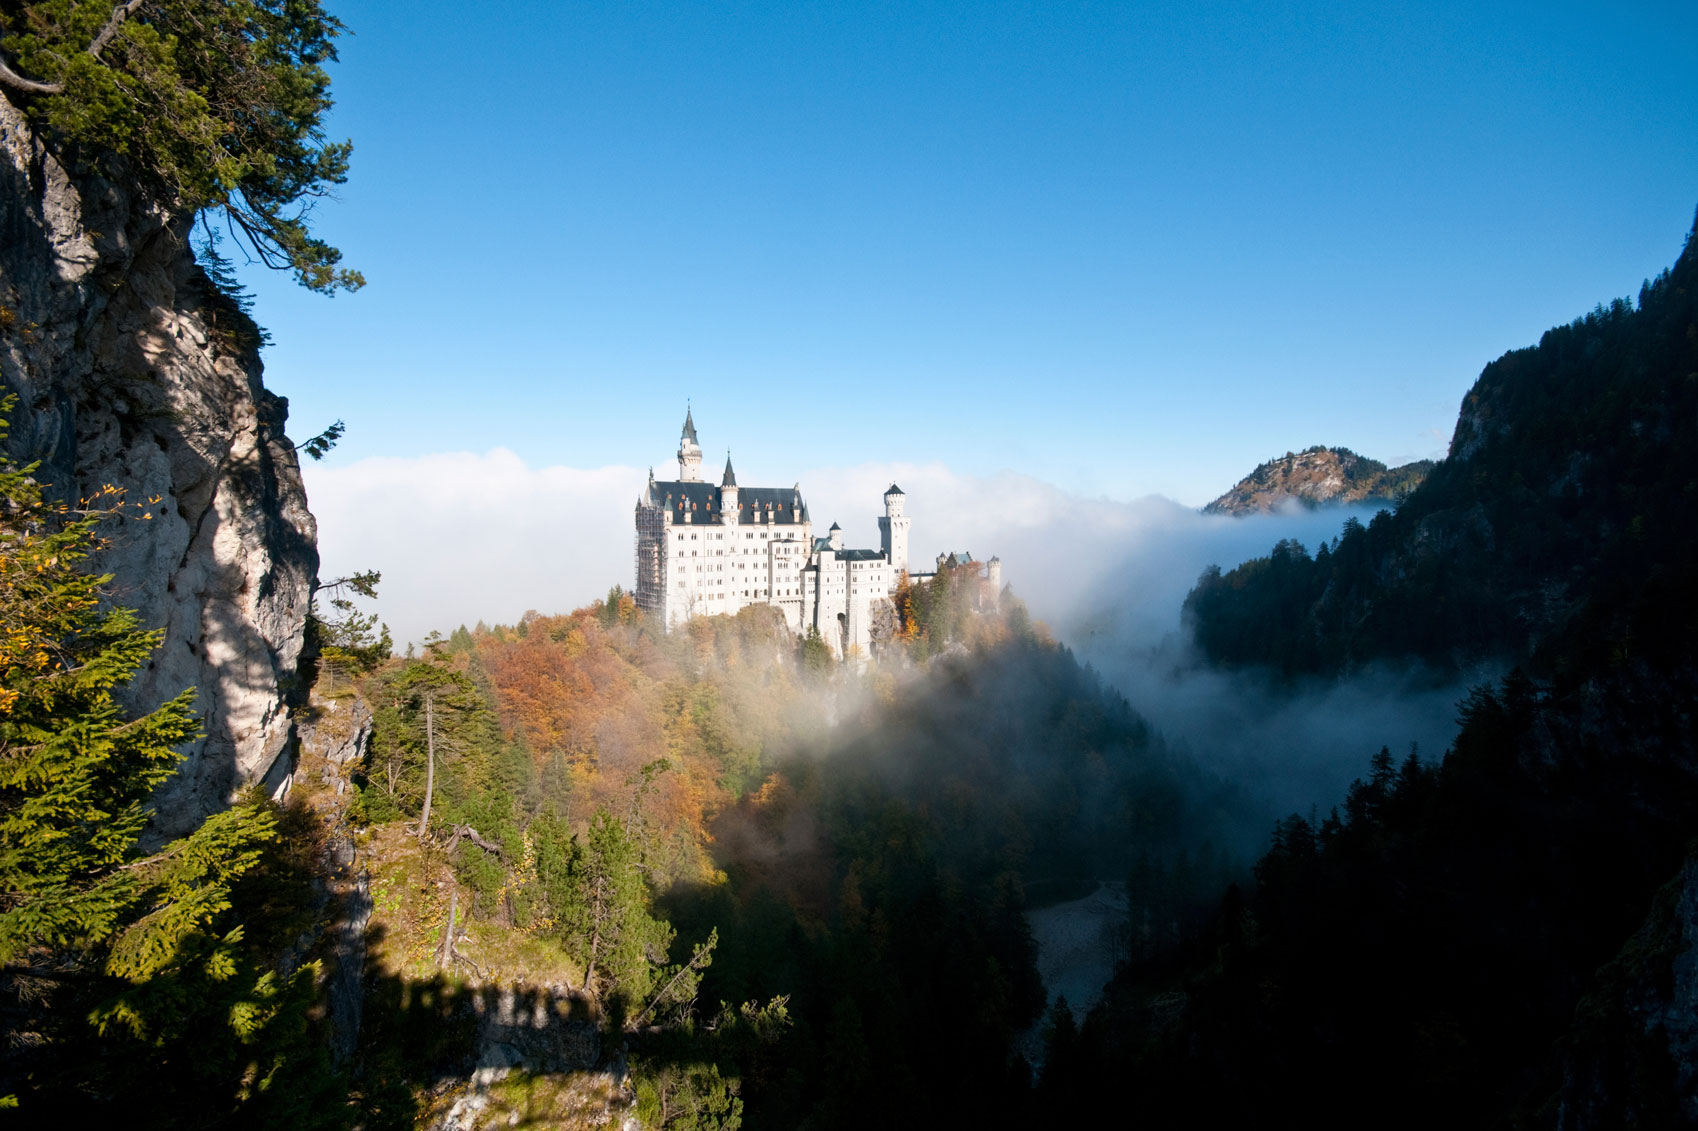 The Most Majestic Castles in Europe